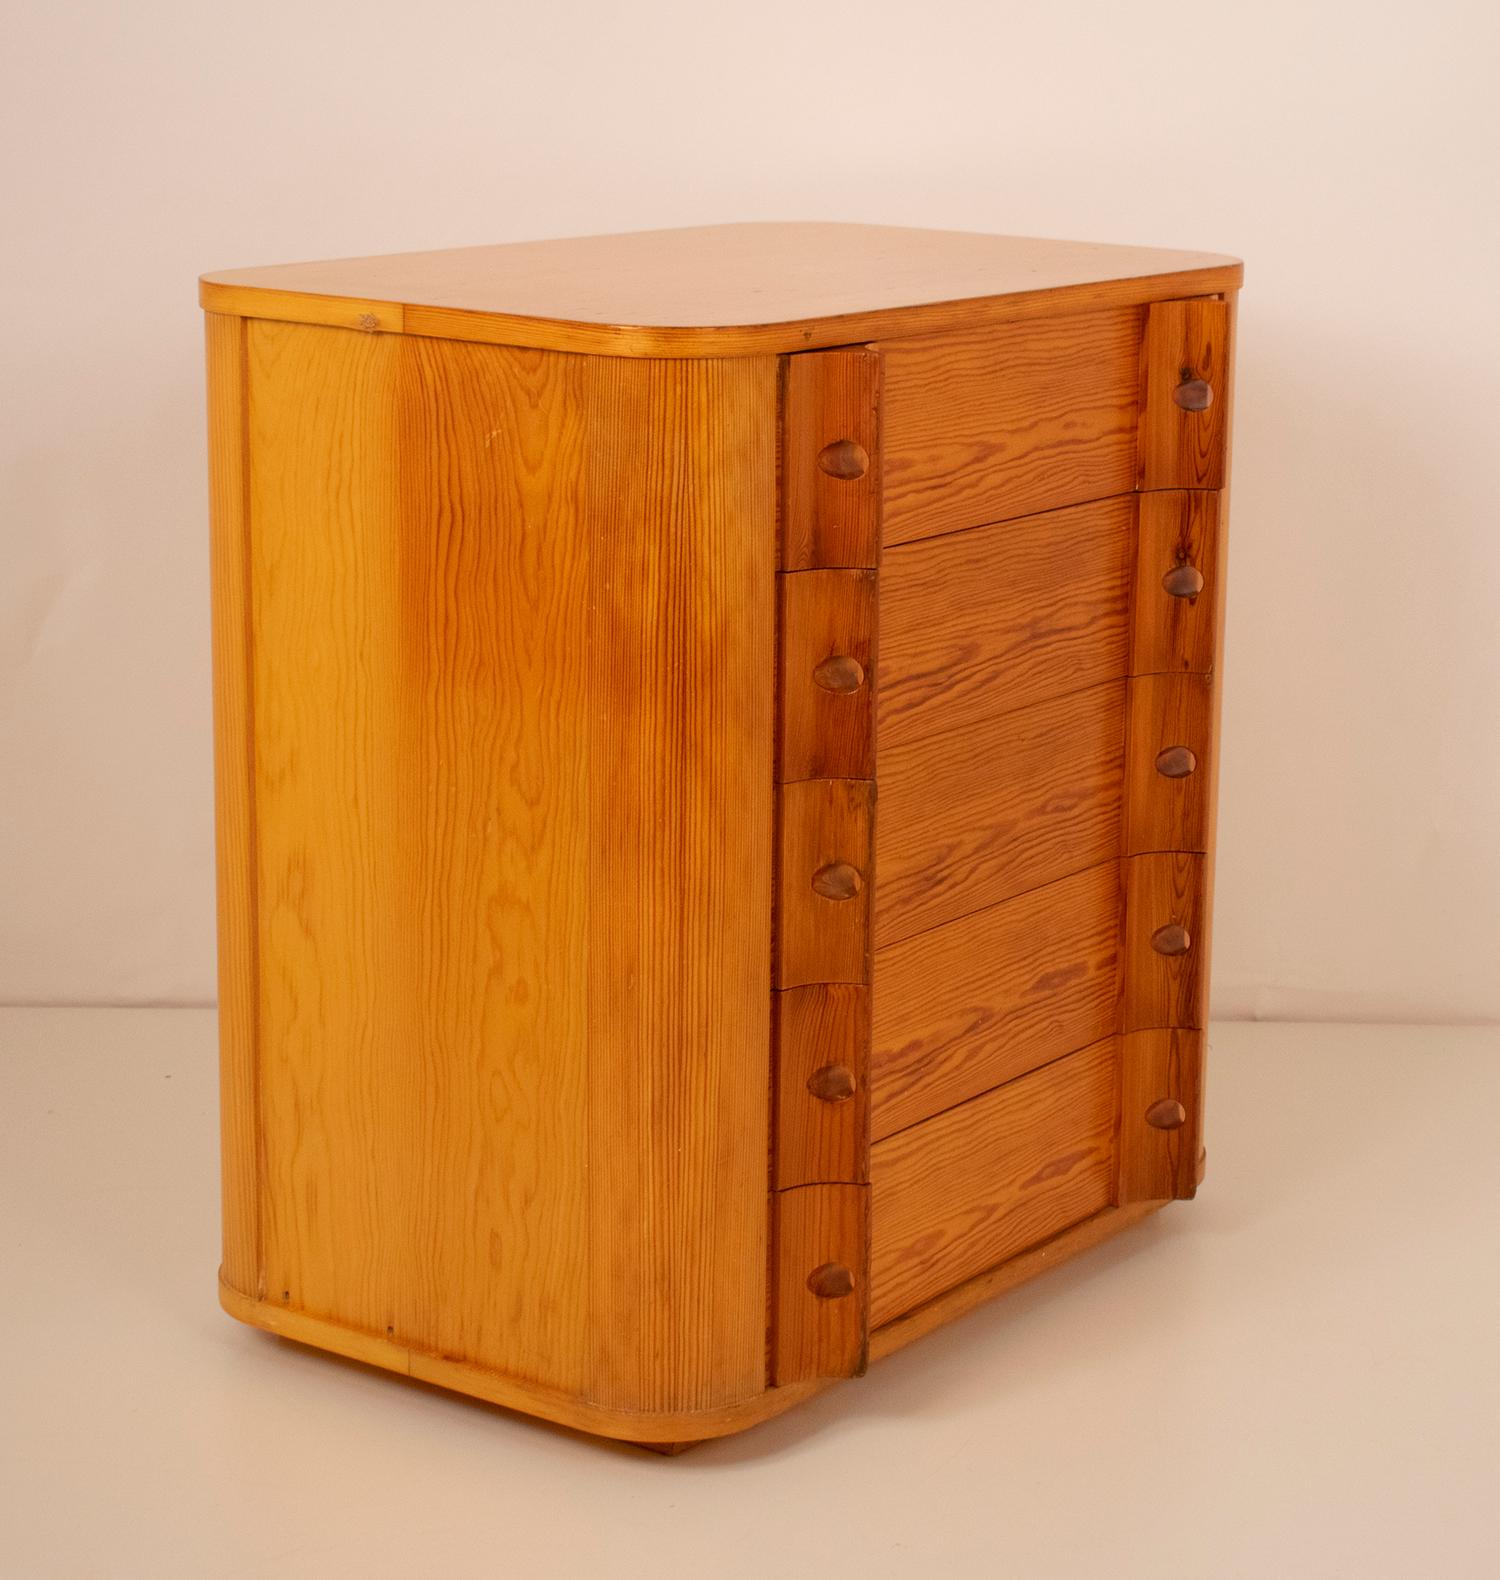 Pine dresser, designed by Jordi Vilanova. It is also finished in pine on the back. It consists of five drawers. and has rounded corners.